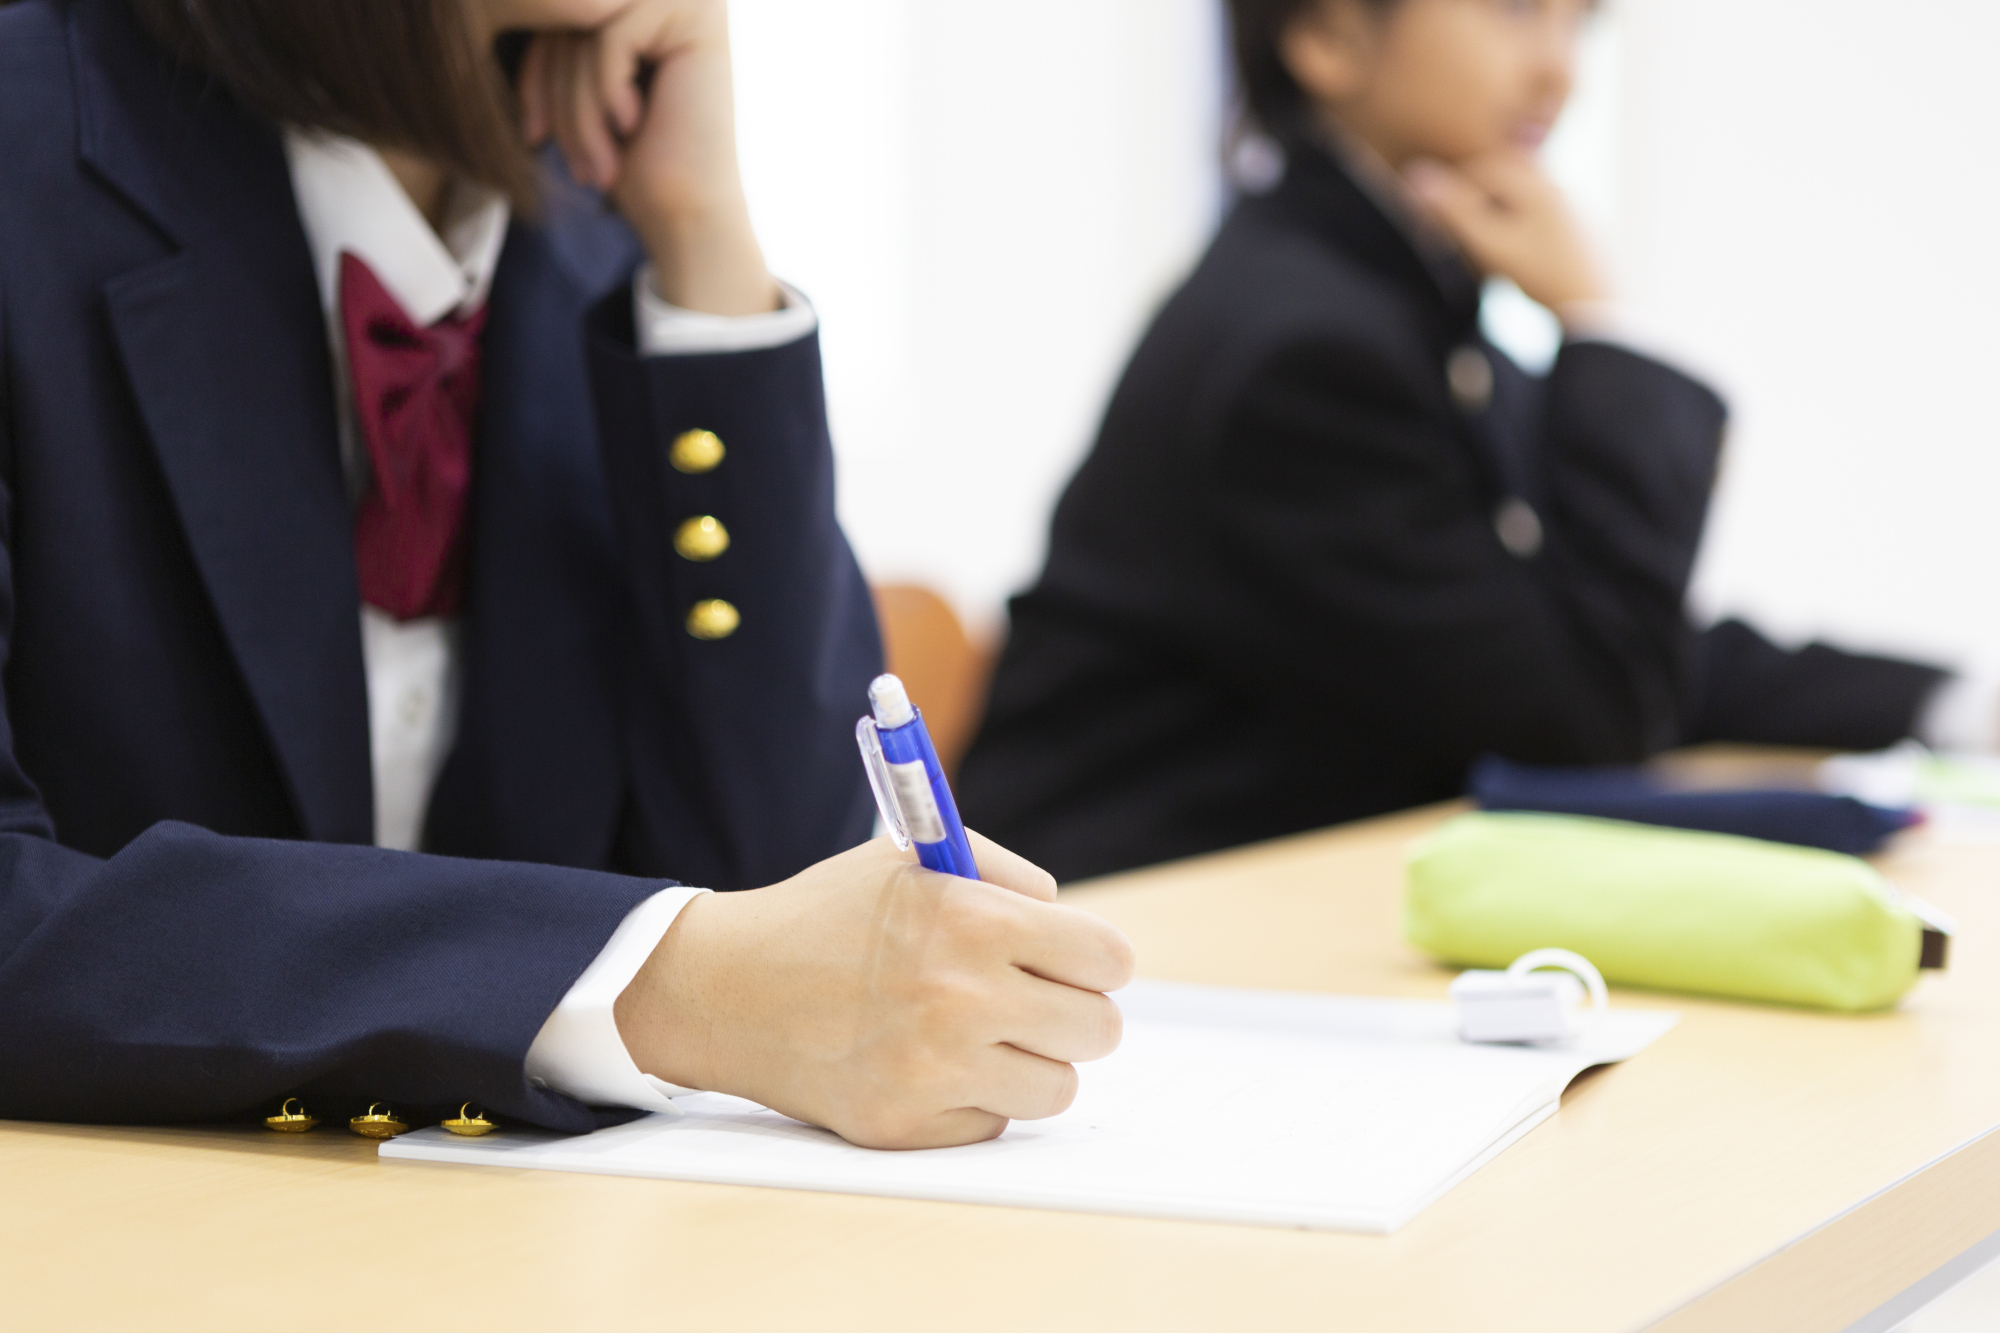 About 40% of Japanese teens say sex education at school is useless survey  pic